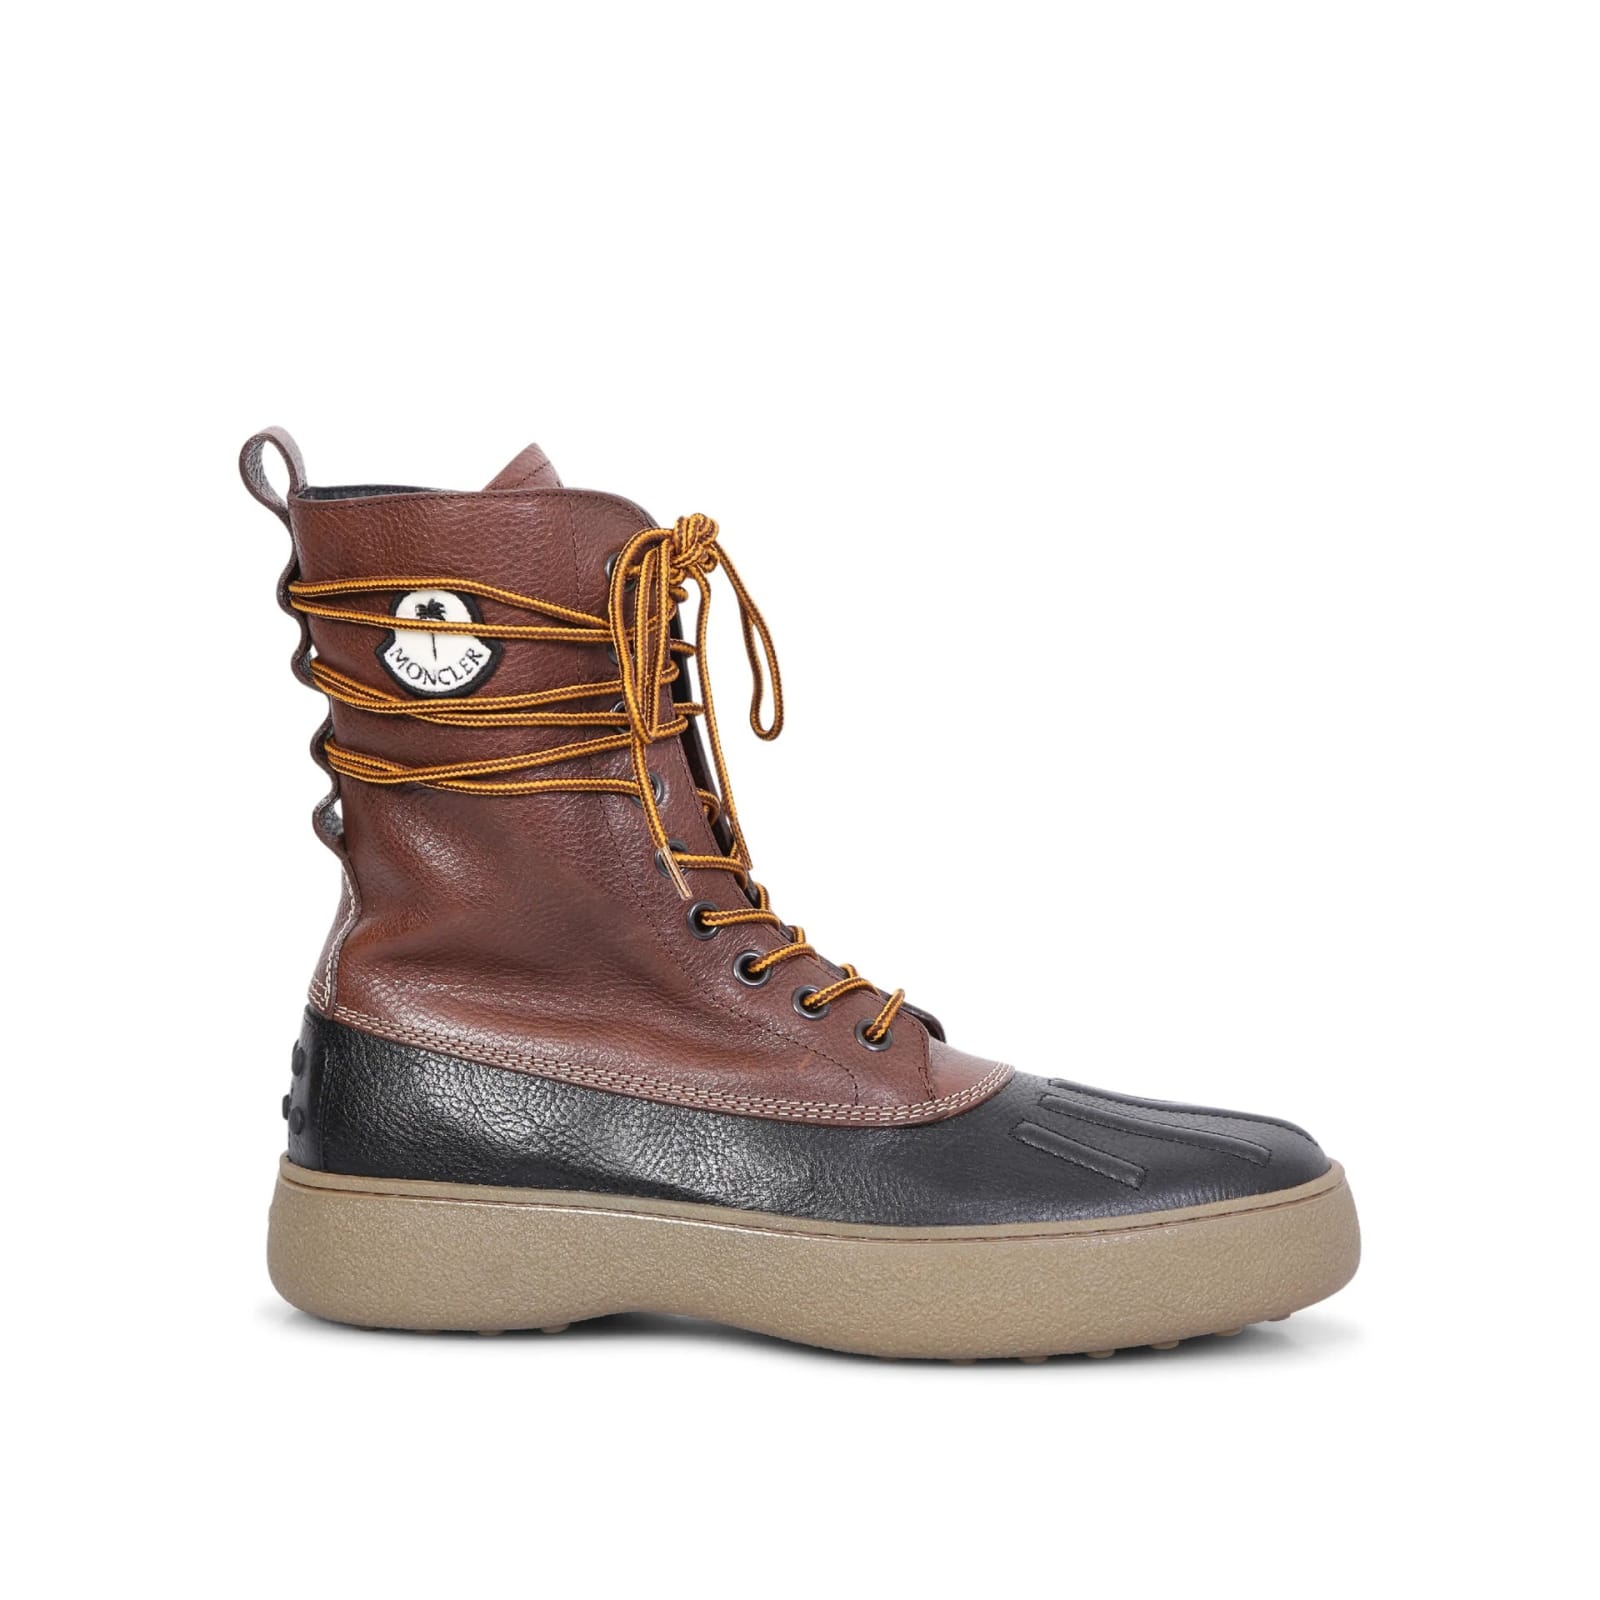 TOD'S X MONCLER X PALM ANGELS LEATHER BOOTS